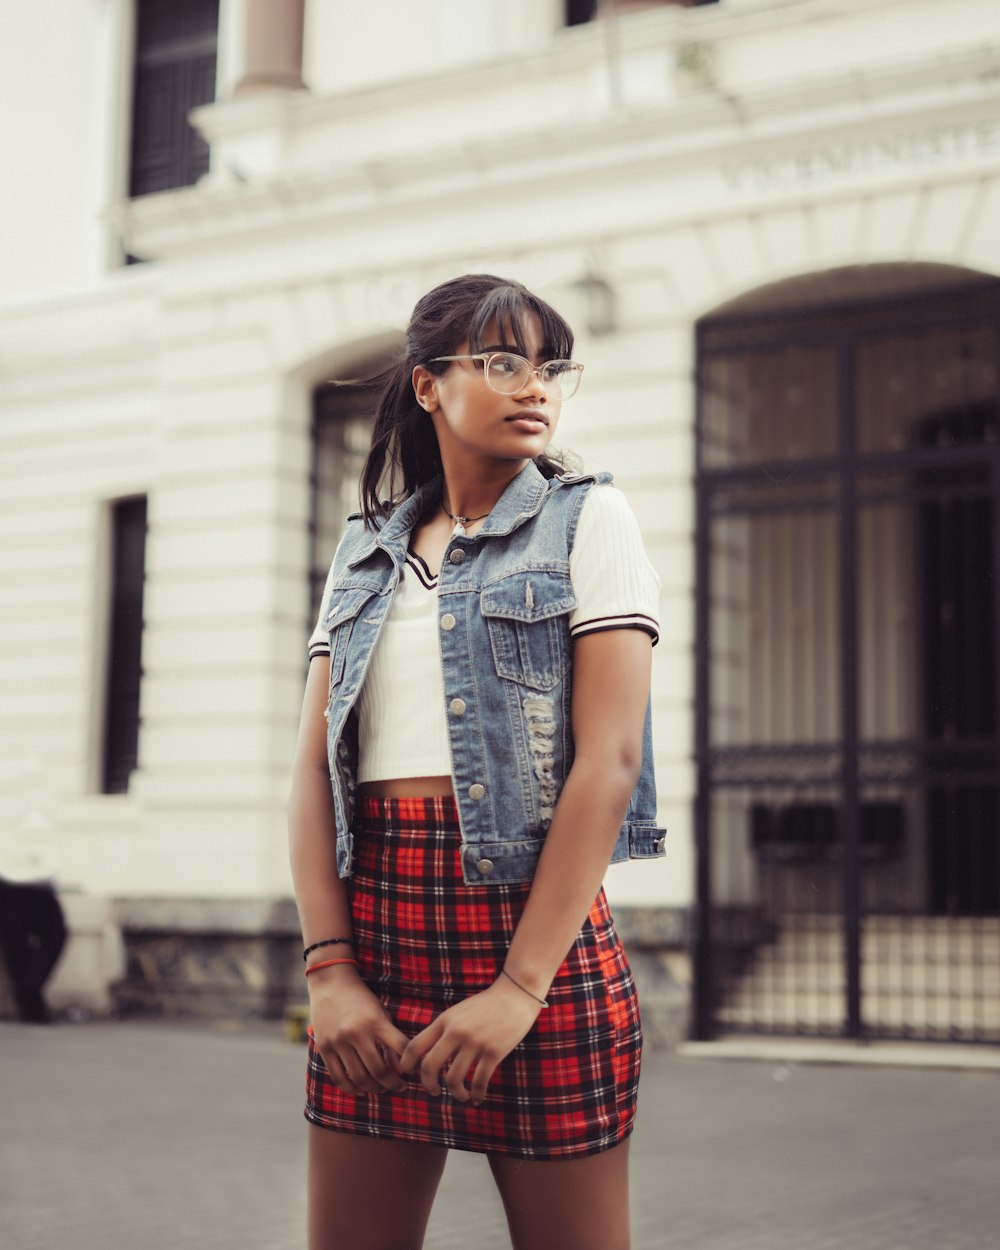 woman in blue denim button up jacket and red and black plaid skirt standing on sidewalk